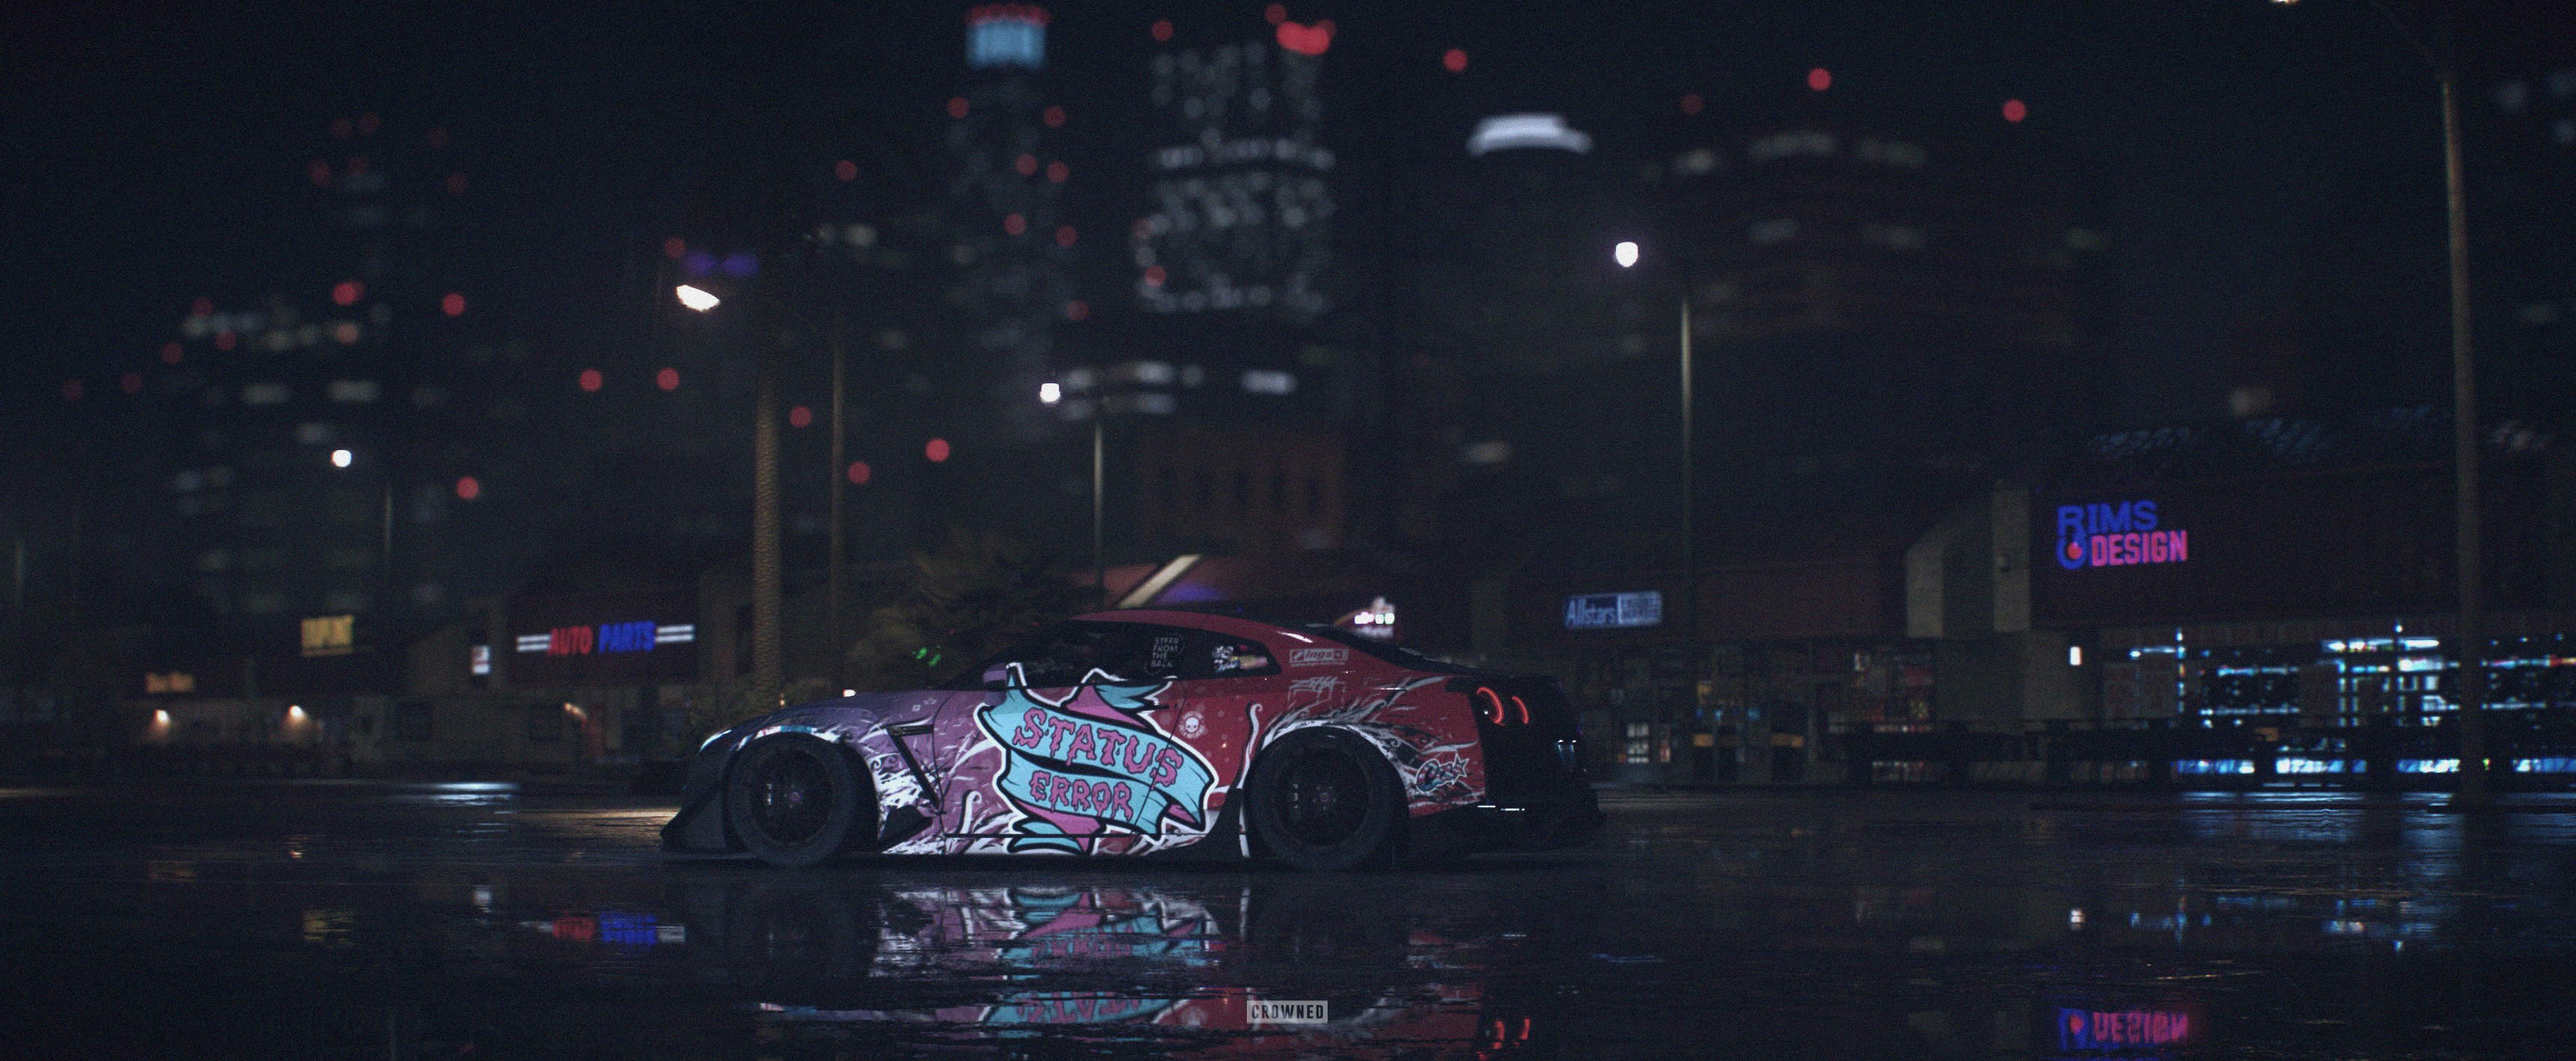 CROWNED Need For Speed Nissan GTR 3440x1417